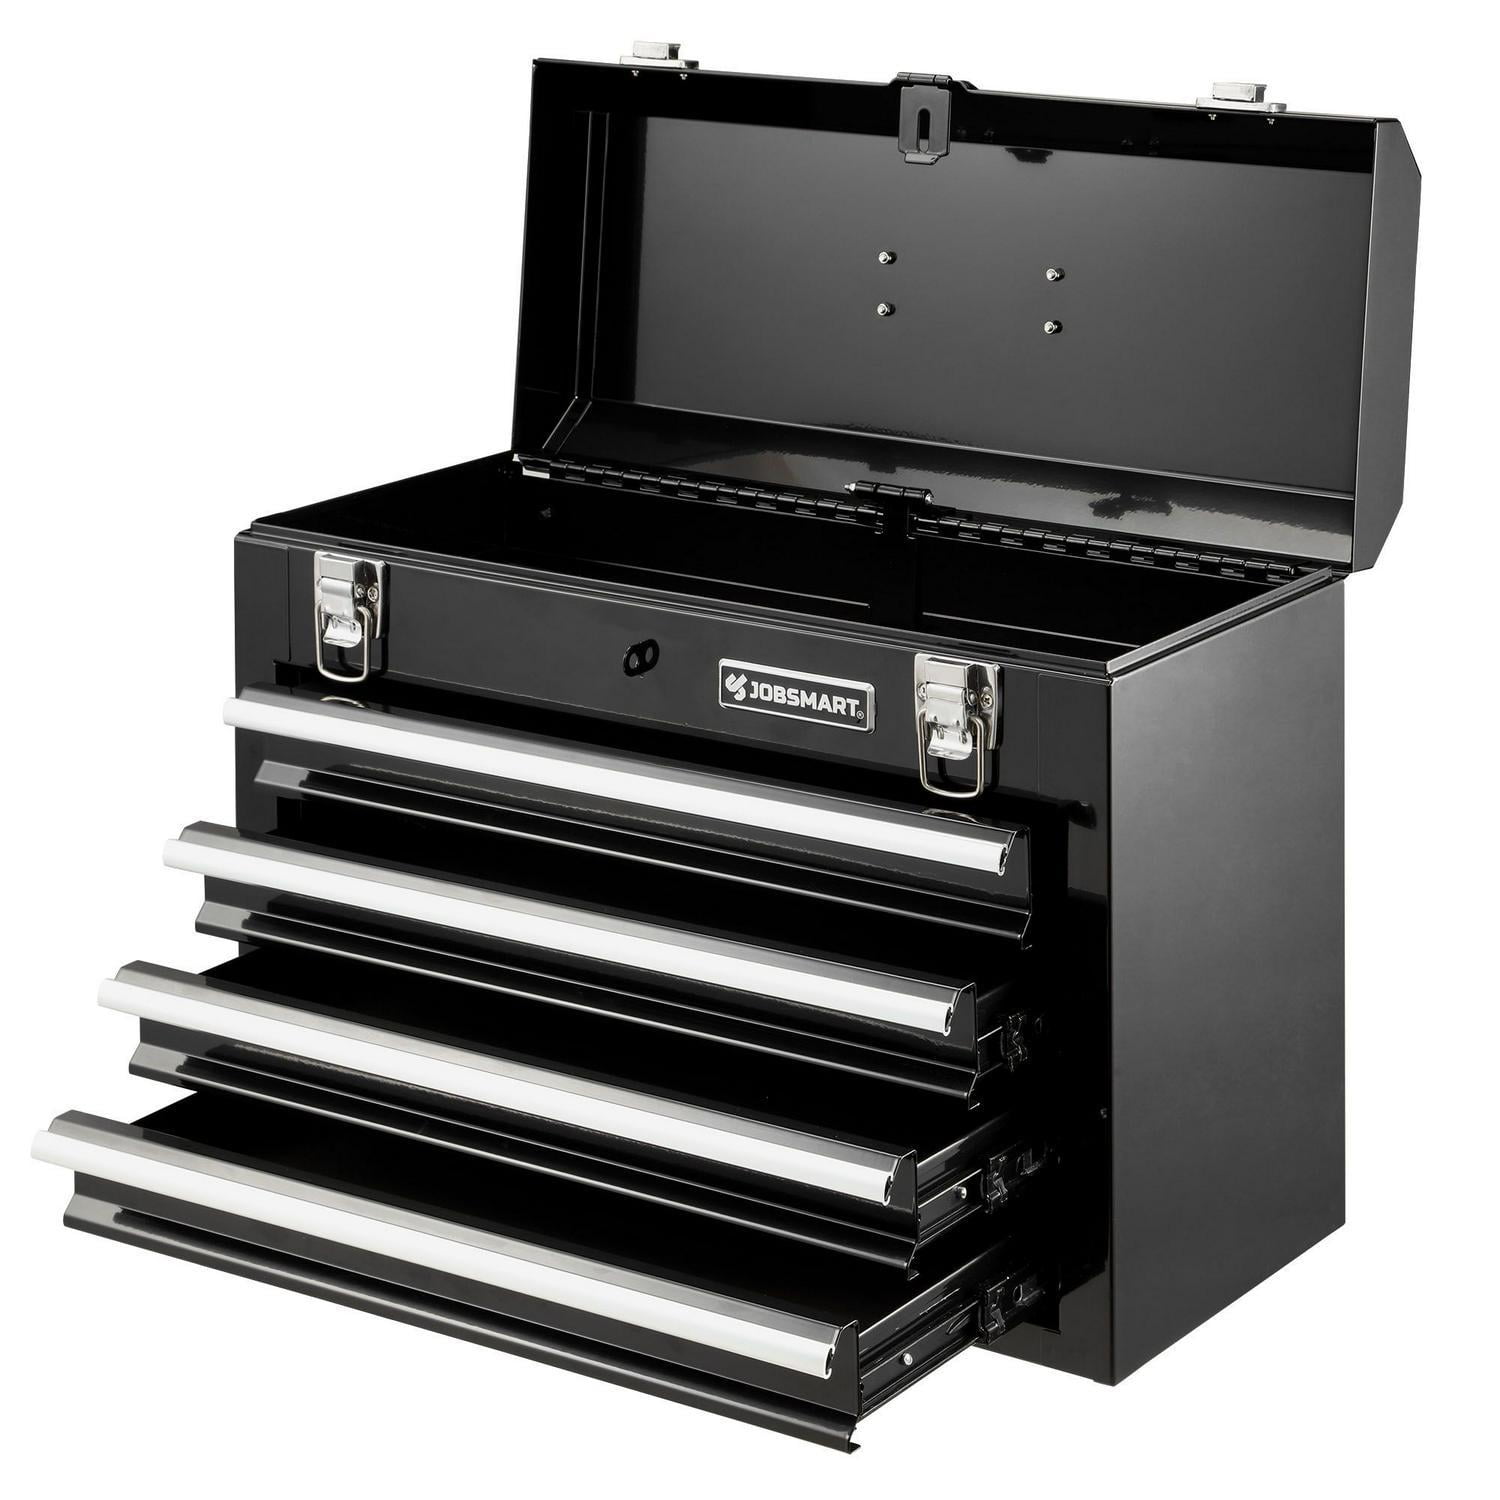 Seizeen 2-IN-1 Tool Chest & Cabinet, Large Capacity 8-Drawer Rolling Tool  Box Organizer with Wheels Lockable, Black 